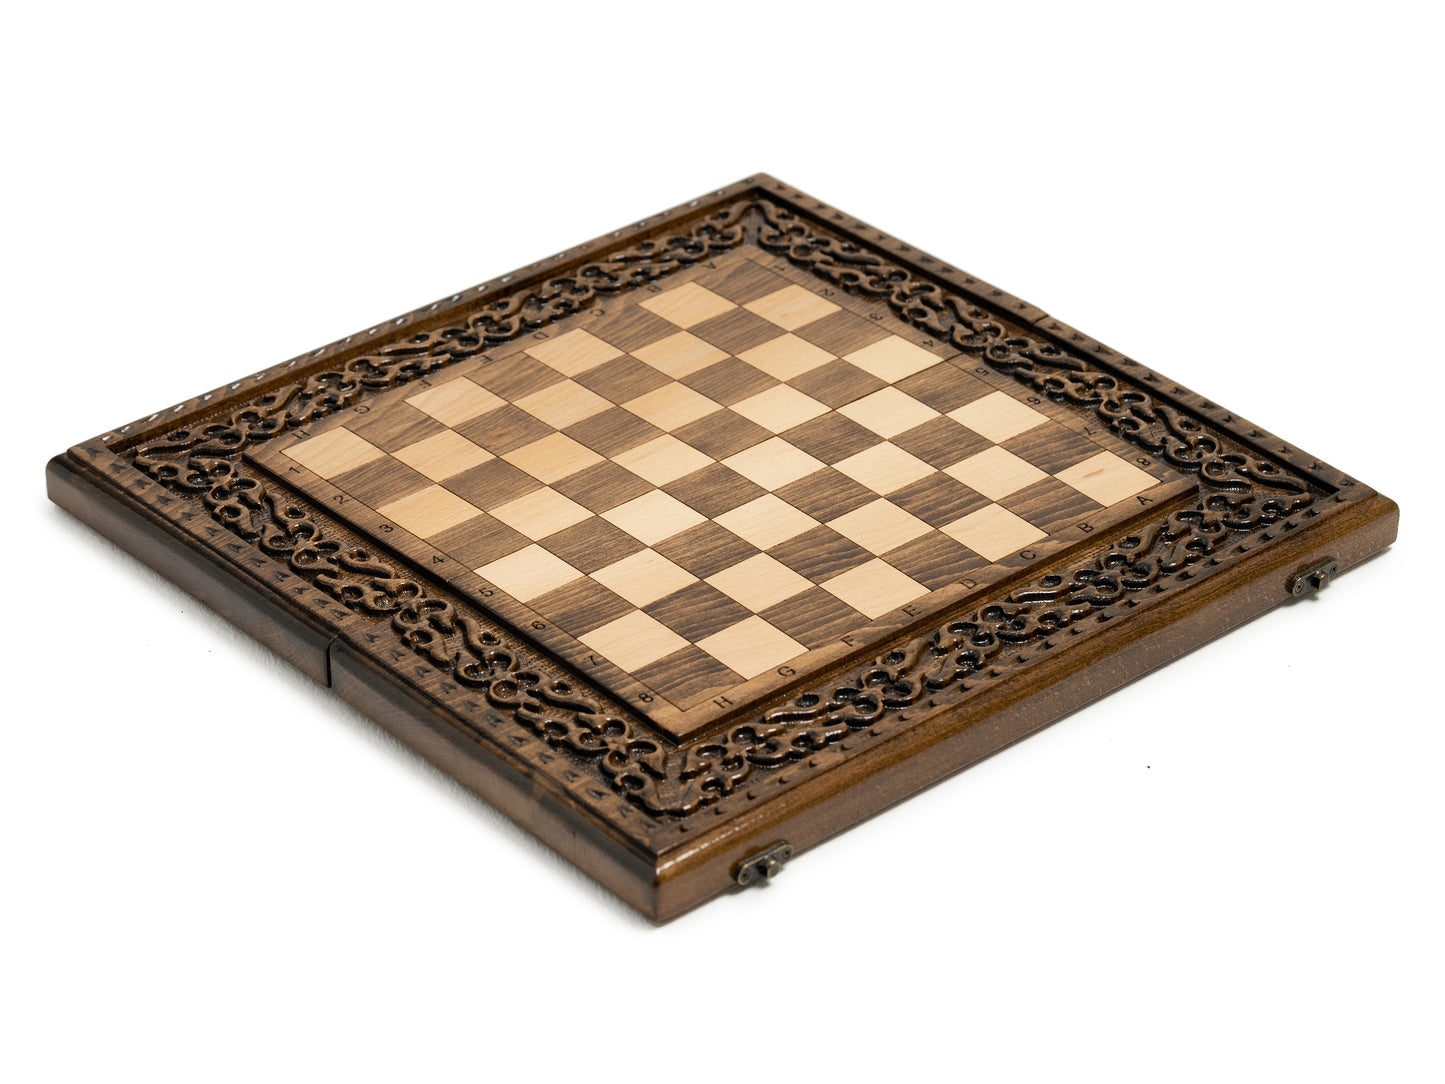 High-quality handmade chess board with traditional pieces